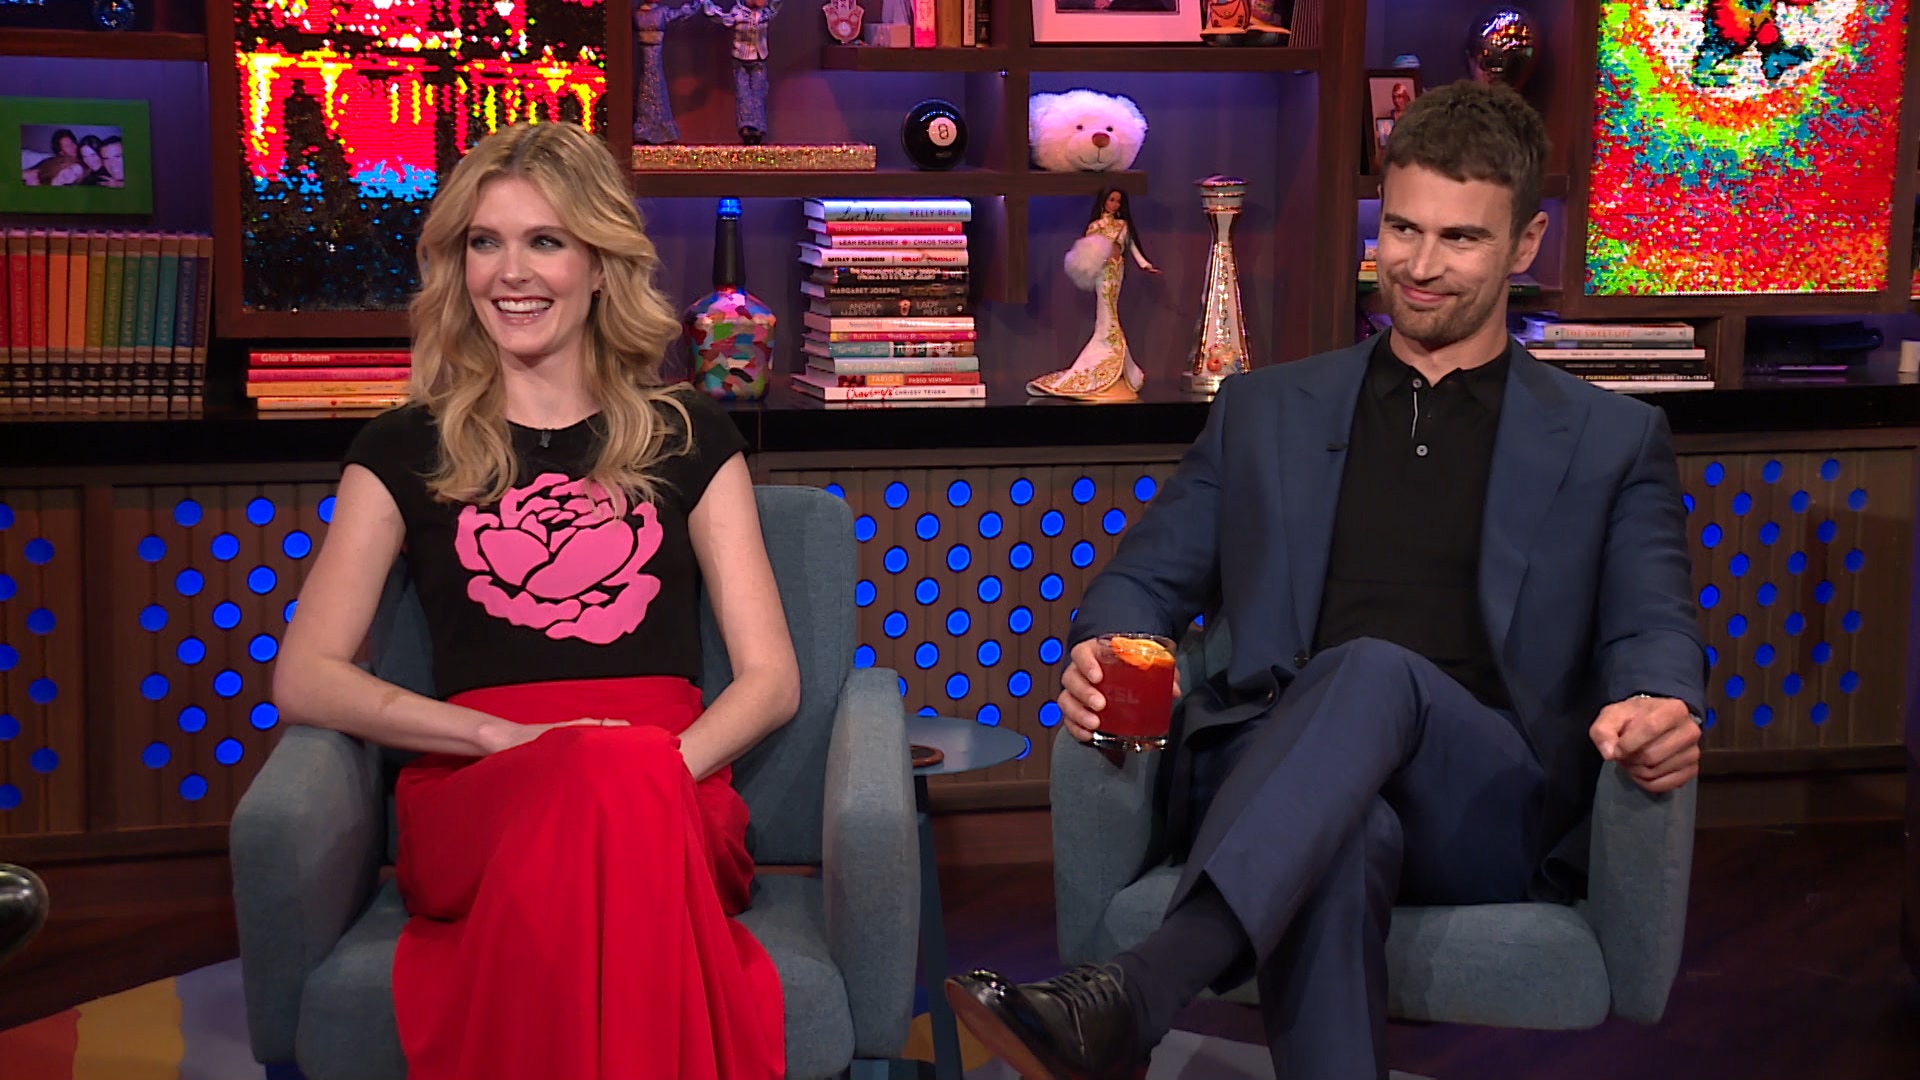 Watch Watch What Happens Live Episode Watch What Happens Live 1/12